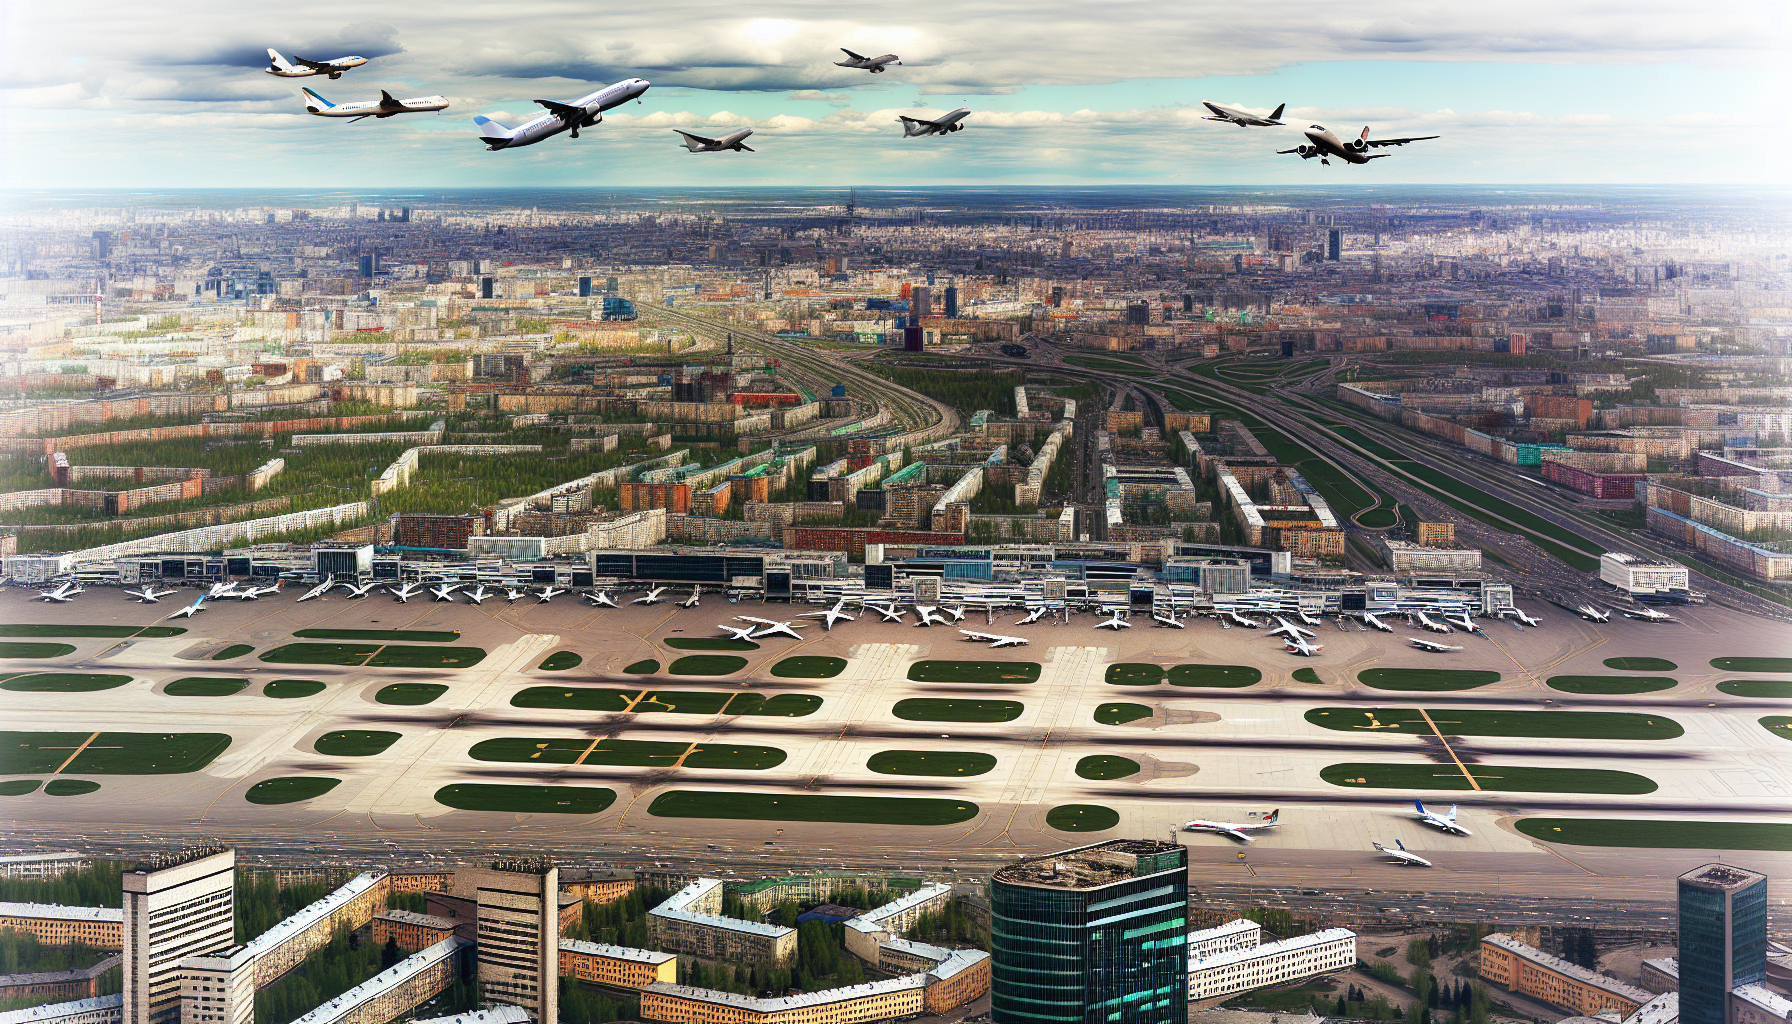 Aerial view of a city with airplanes taking off and landing at the airport